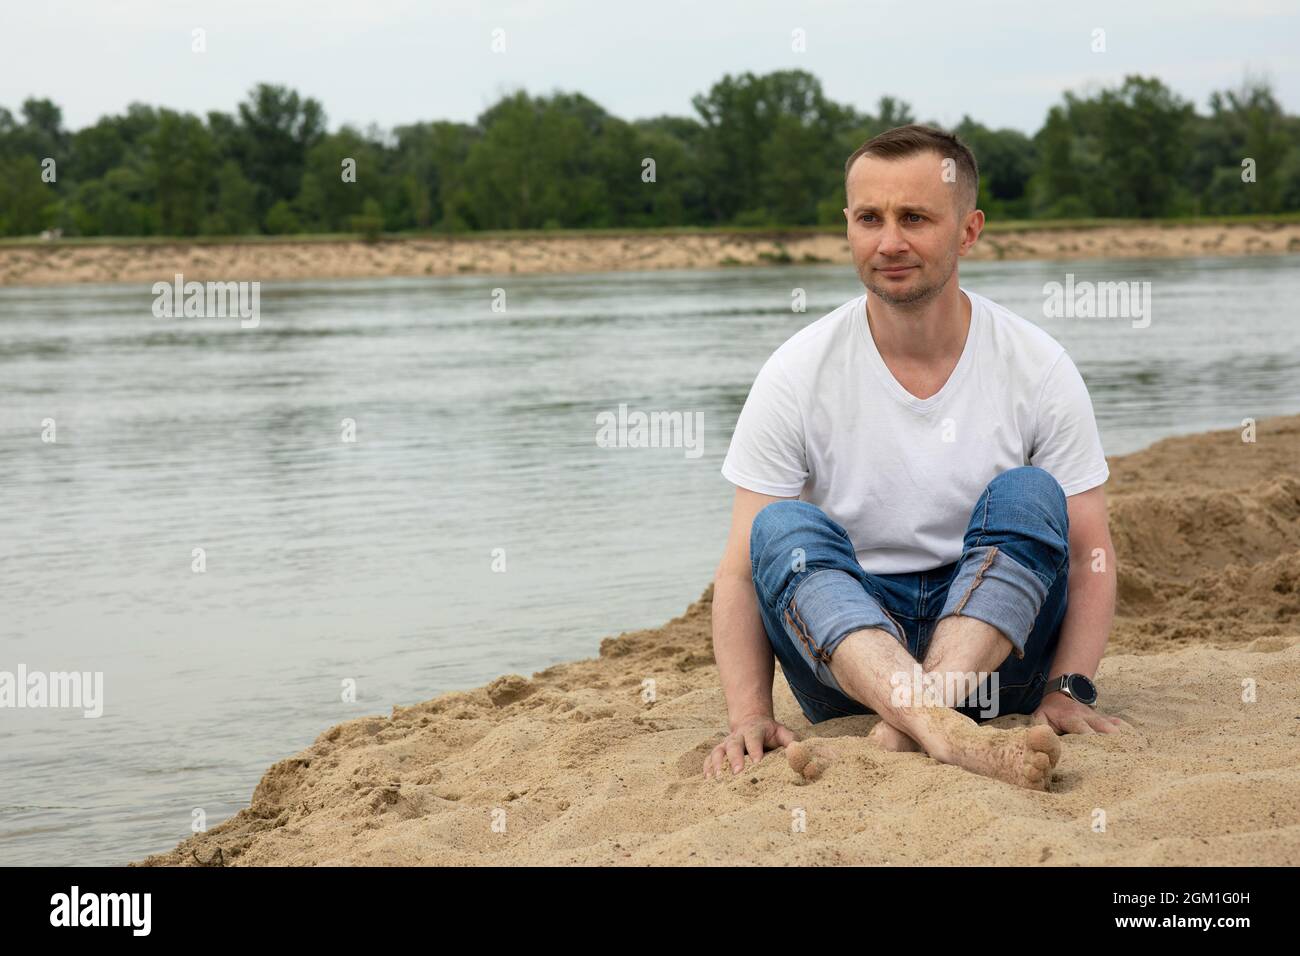 The image lonely positive and smile man sitting on the beach river Stock Photo